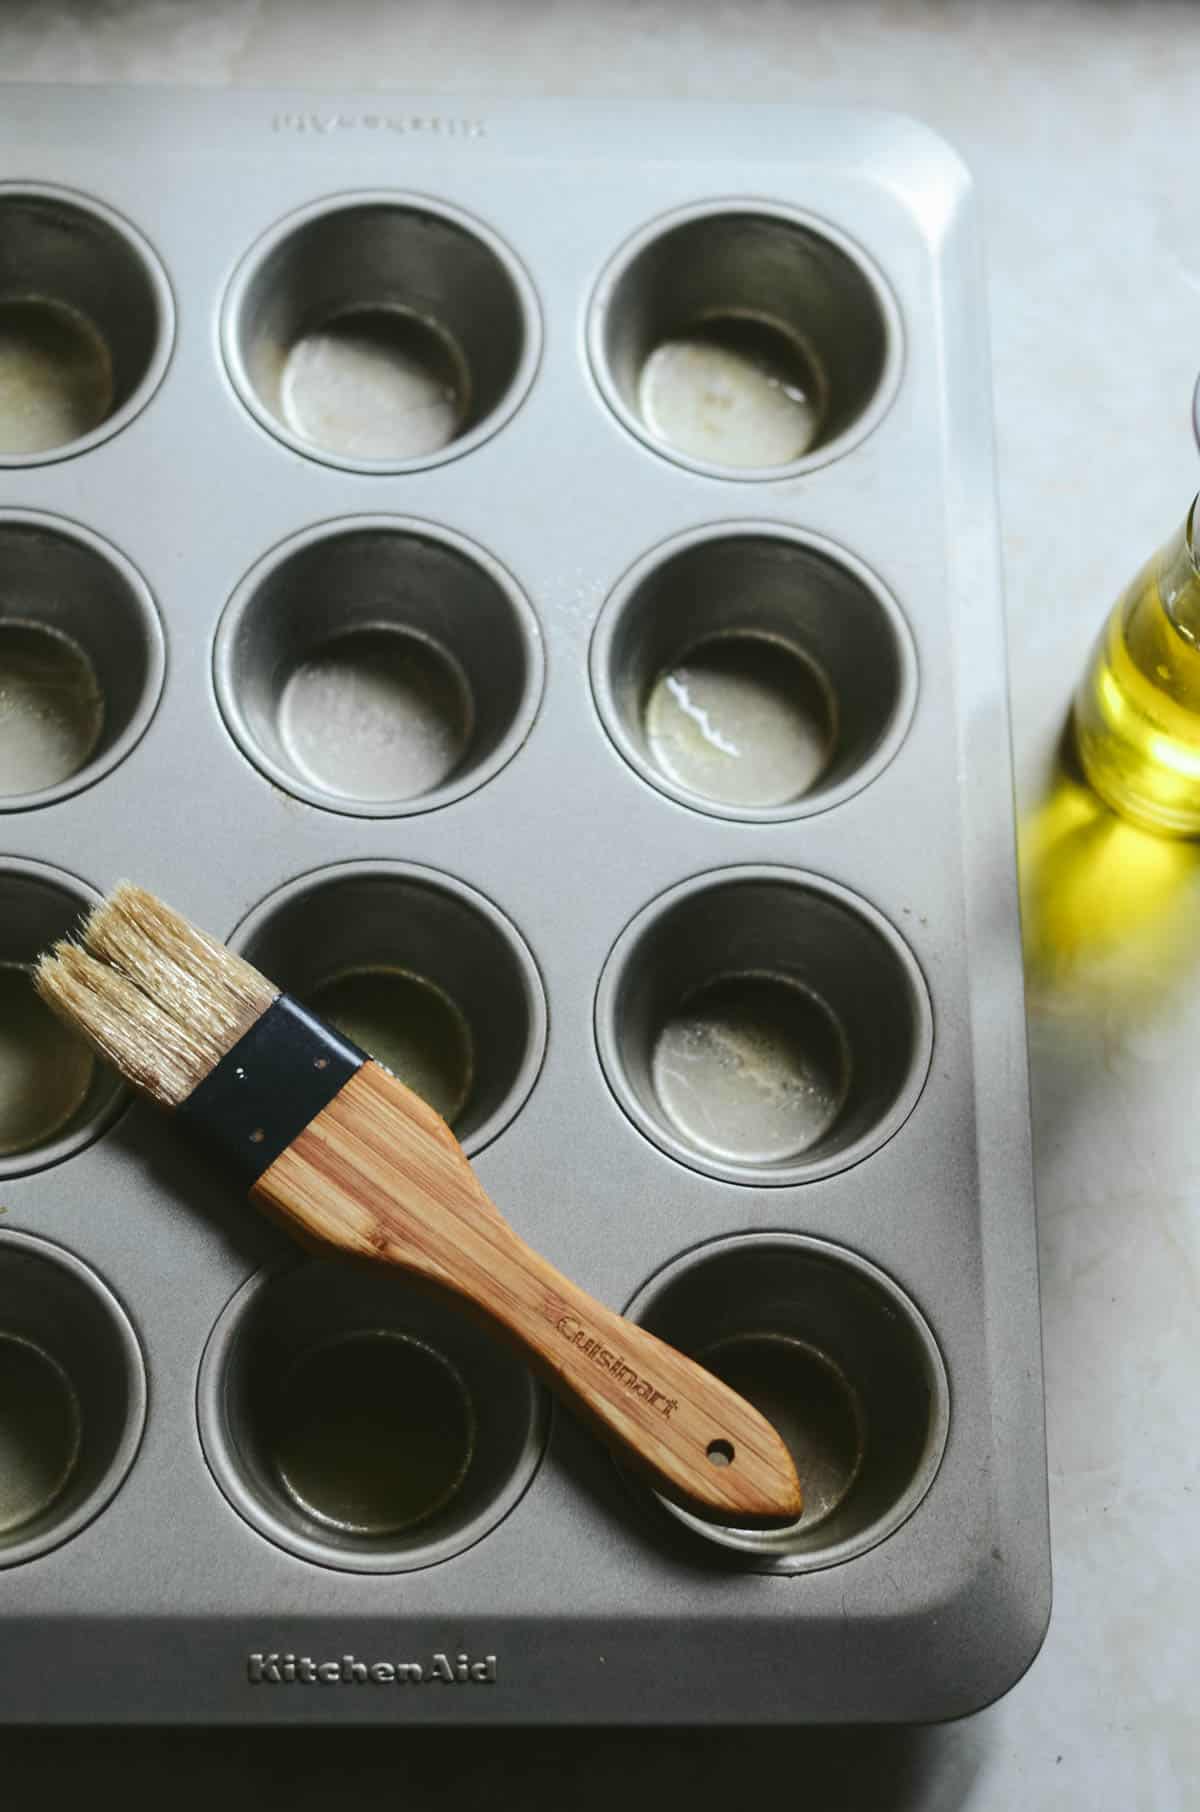 Muffins tray being greased with a pastry brush and oil.